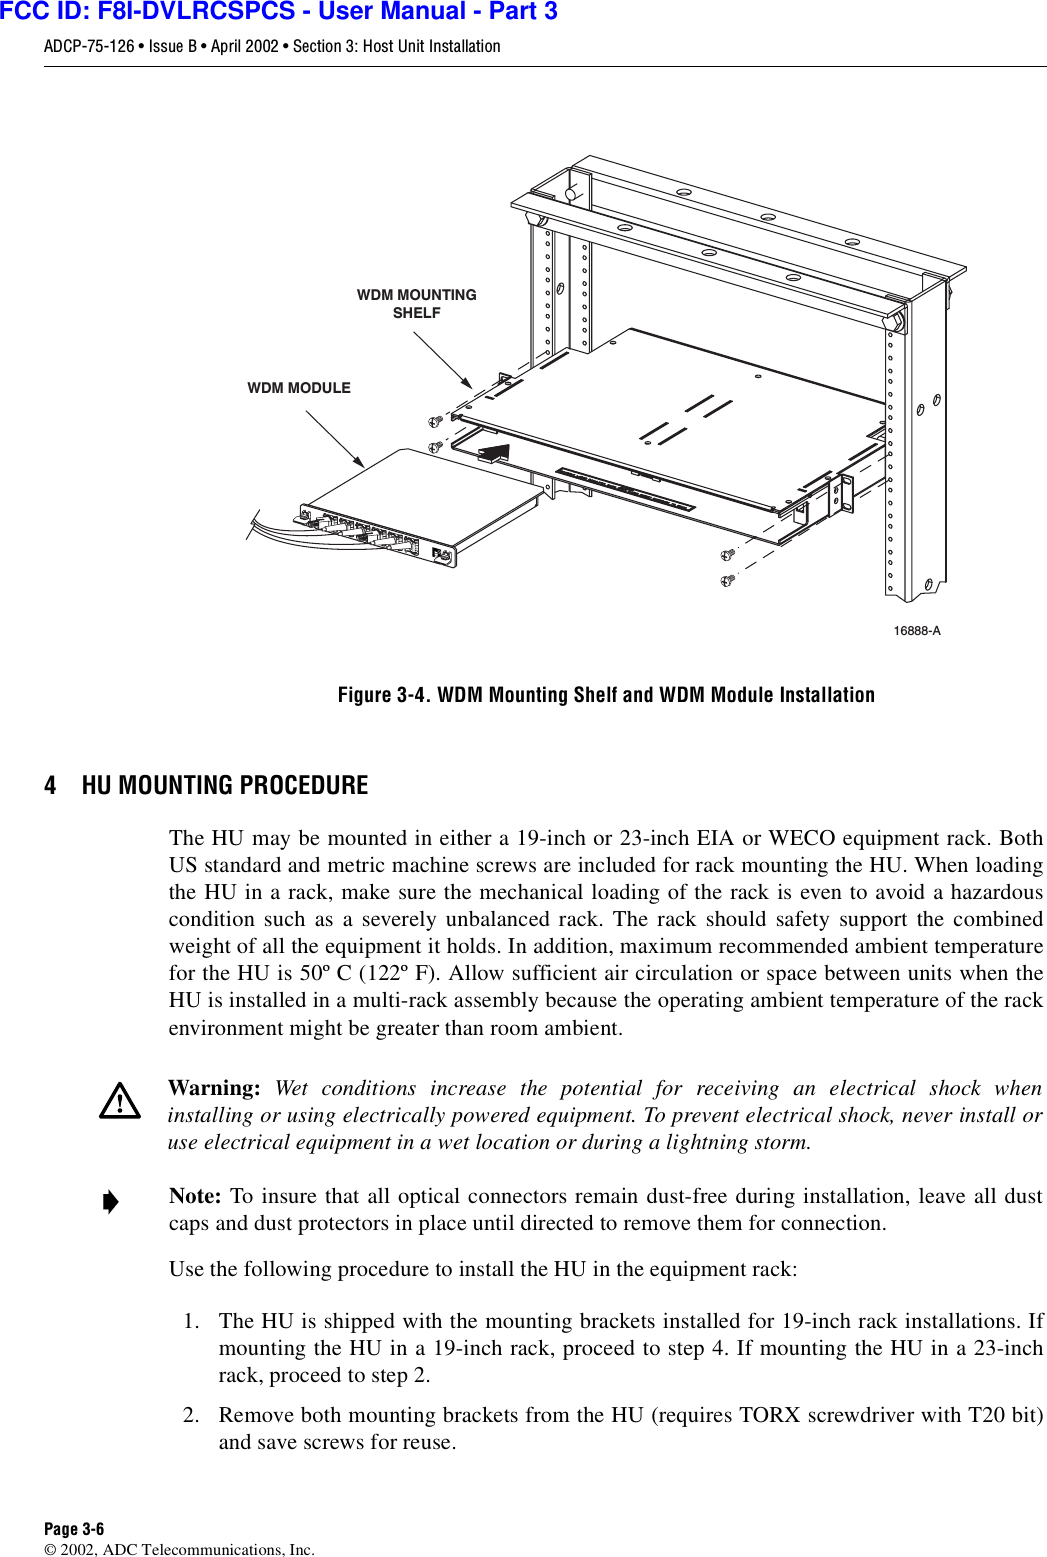 ADCP-75-126 • Issue B • April 2002 • Section 3: Host Unit InstallationPage 3-6©2002, ADC Telecommunications, Inc.Figure 3-4. WDM Mounting Shelf and WDM Module Installation4 HU MOUNTING PROCEDUREThe HU may be mounted in either a19-inch or 23-inch EIA or WECO equipment rack. BothUS standard and metric machine screws are included for rack mounting the HU. When loadingthe HU in arack, make sure the mechanical loading of the rack is even to avoid ahazardouscondition such as aseverely unbalanced rack. The rack should safety support the combinedweight of all the equipment it holds. In addition, maximum recommended ambient temperaturefor the HU is 50º C(122º F). Allow sufficient air circulation or space between units when theHU is installed in amulti-rack assembly because the operating ambient temperature of the rackenvironment might be greater than room ambient.Use the following procedure to install the HU in the equipment rack:1. The HU is shipped with the mounting brackets installed for 19-inch rack installations. Ifmounting the HU in a19-inch rack, proceed to step 4. If mounting the HU in a23-inchrack, proceed to step 2.2. Remove both mounting brackets from the HU (requires TORX screwdriver with T20 bit)and save screws for reuse.Warning: Wet conditions increase the potential for receiving an electrical shock wheninstalling or using electrically powered equipment. To prevent electrical shock, never install oruse electrical equipment in awet location or during alightning storm.Note: To insure that all optical connectors remain dust-free during installation, leave all dustcaps and dust protectors in place until directed to remove them for connection.16888-A WDM MODULEWDM MOUNTINGSHELFFCC ID: F8I-DVLRCSPCS - User Manual - Part 3